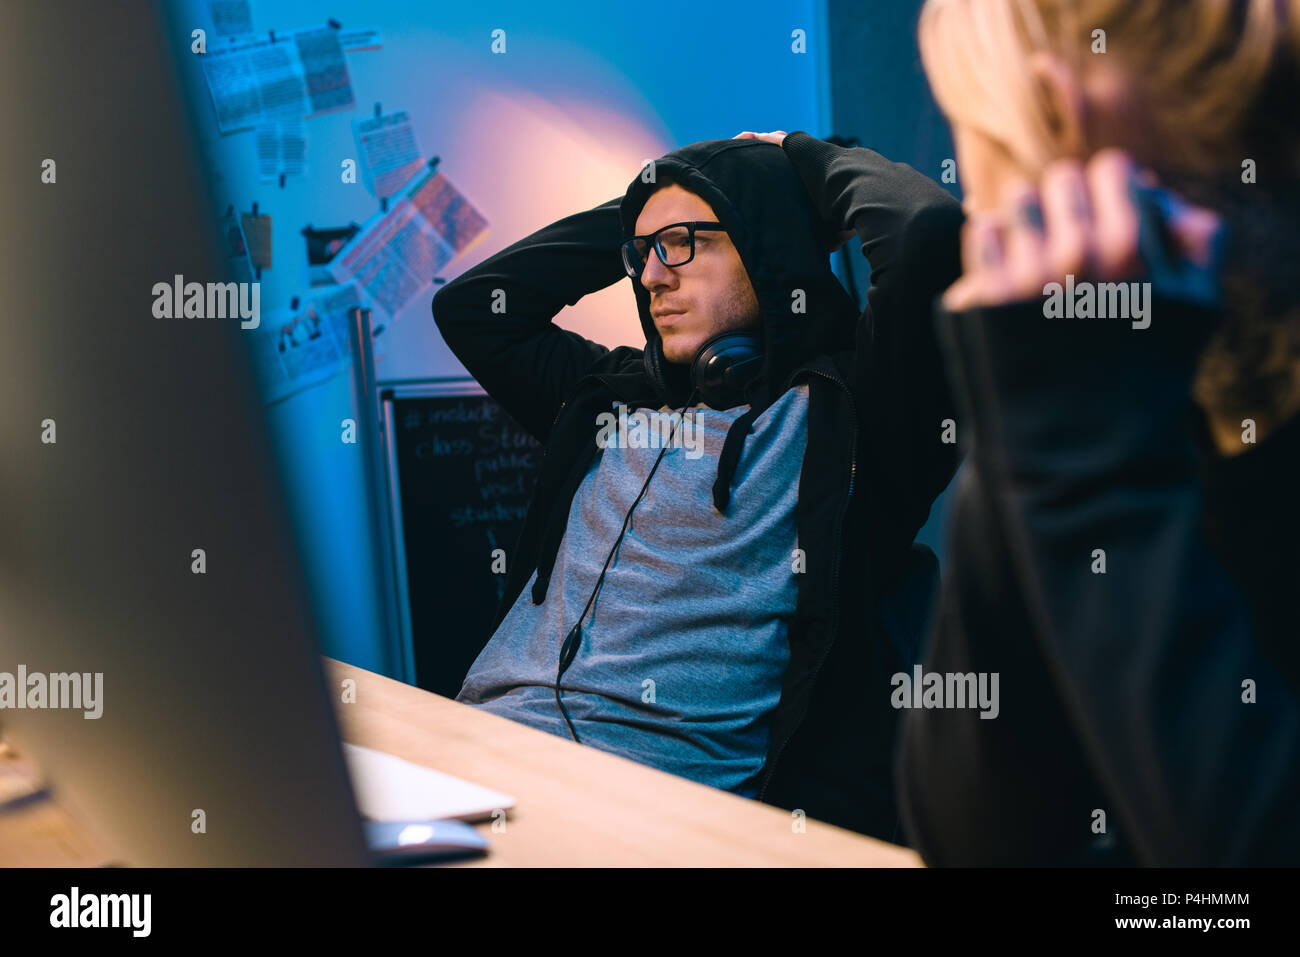 female hacker looking at depressed accomplice at workplace Stock Photo